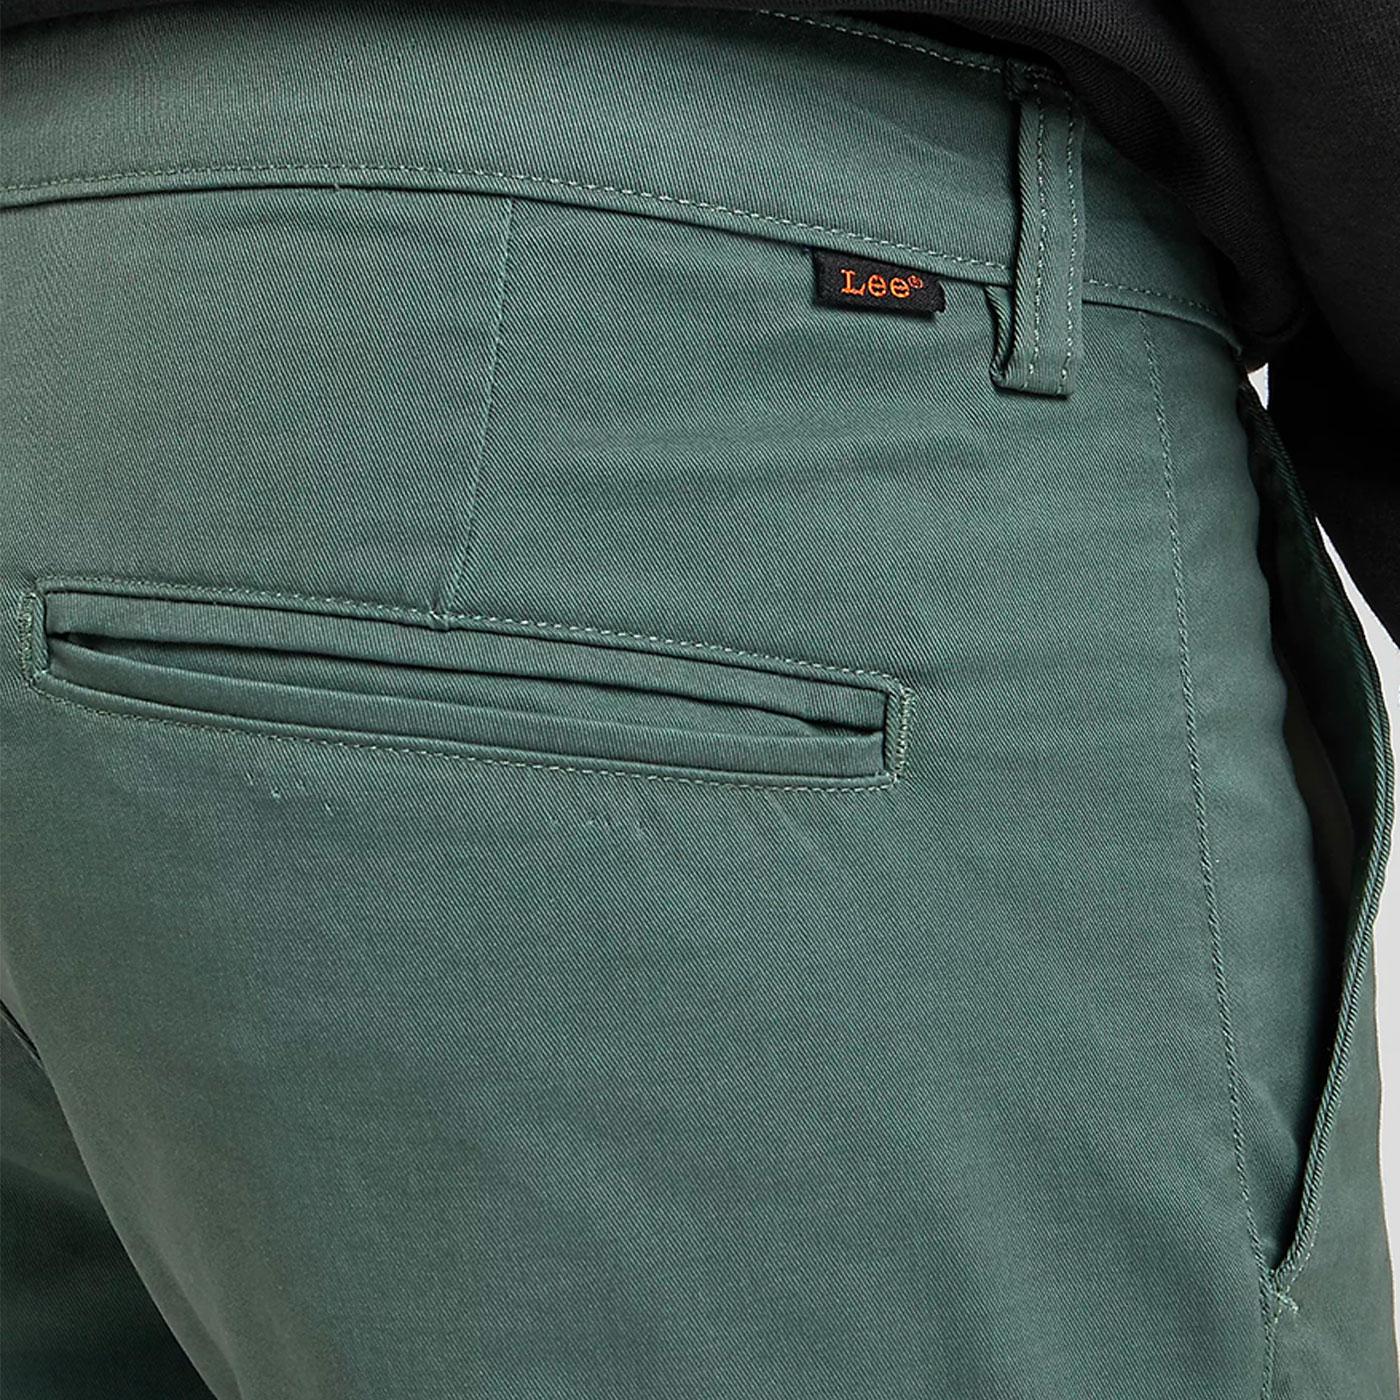 LEE JEANS Retro Slim Fit CHETOPA Twill Chinos in Fort Green